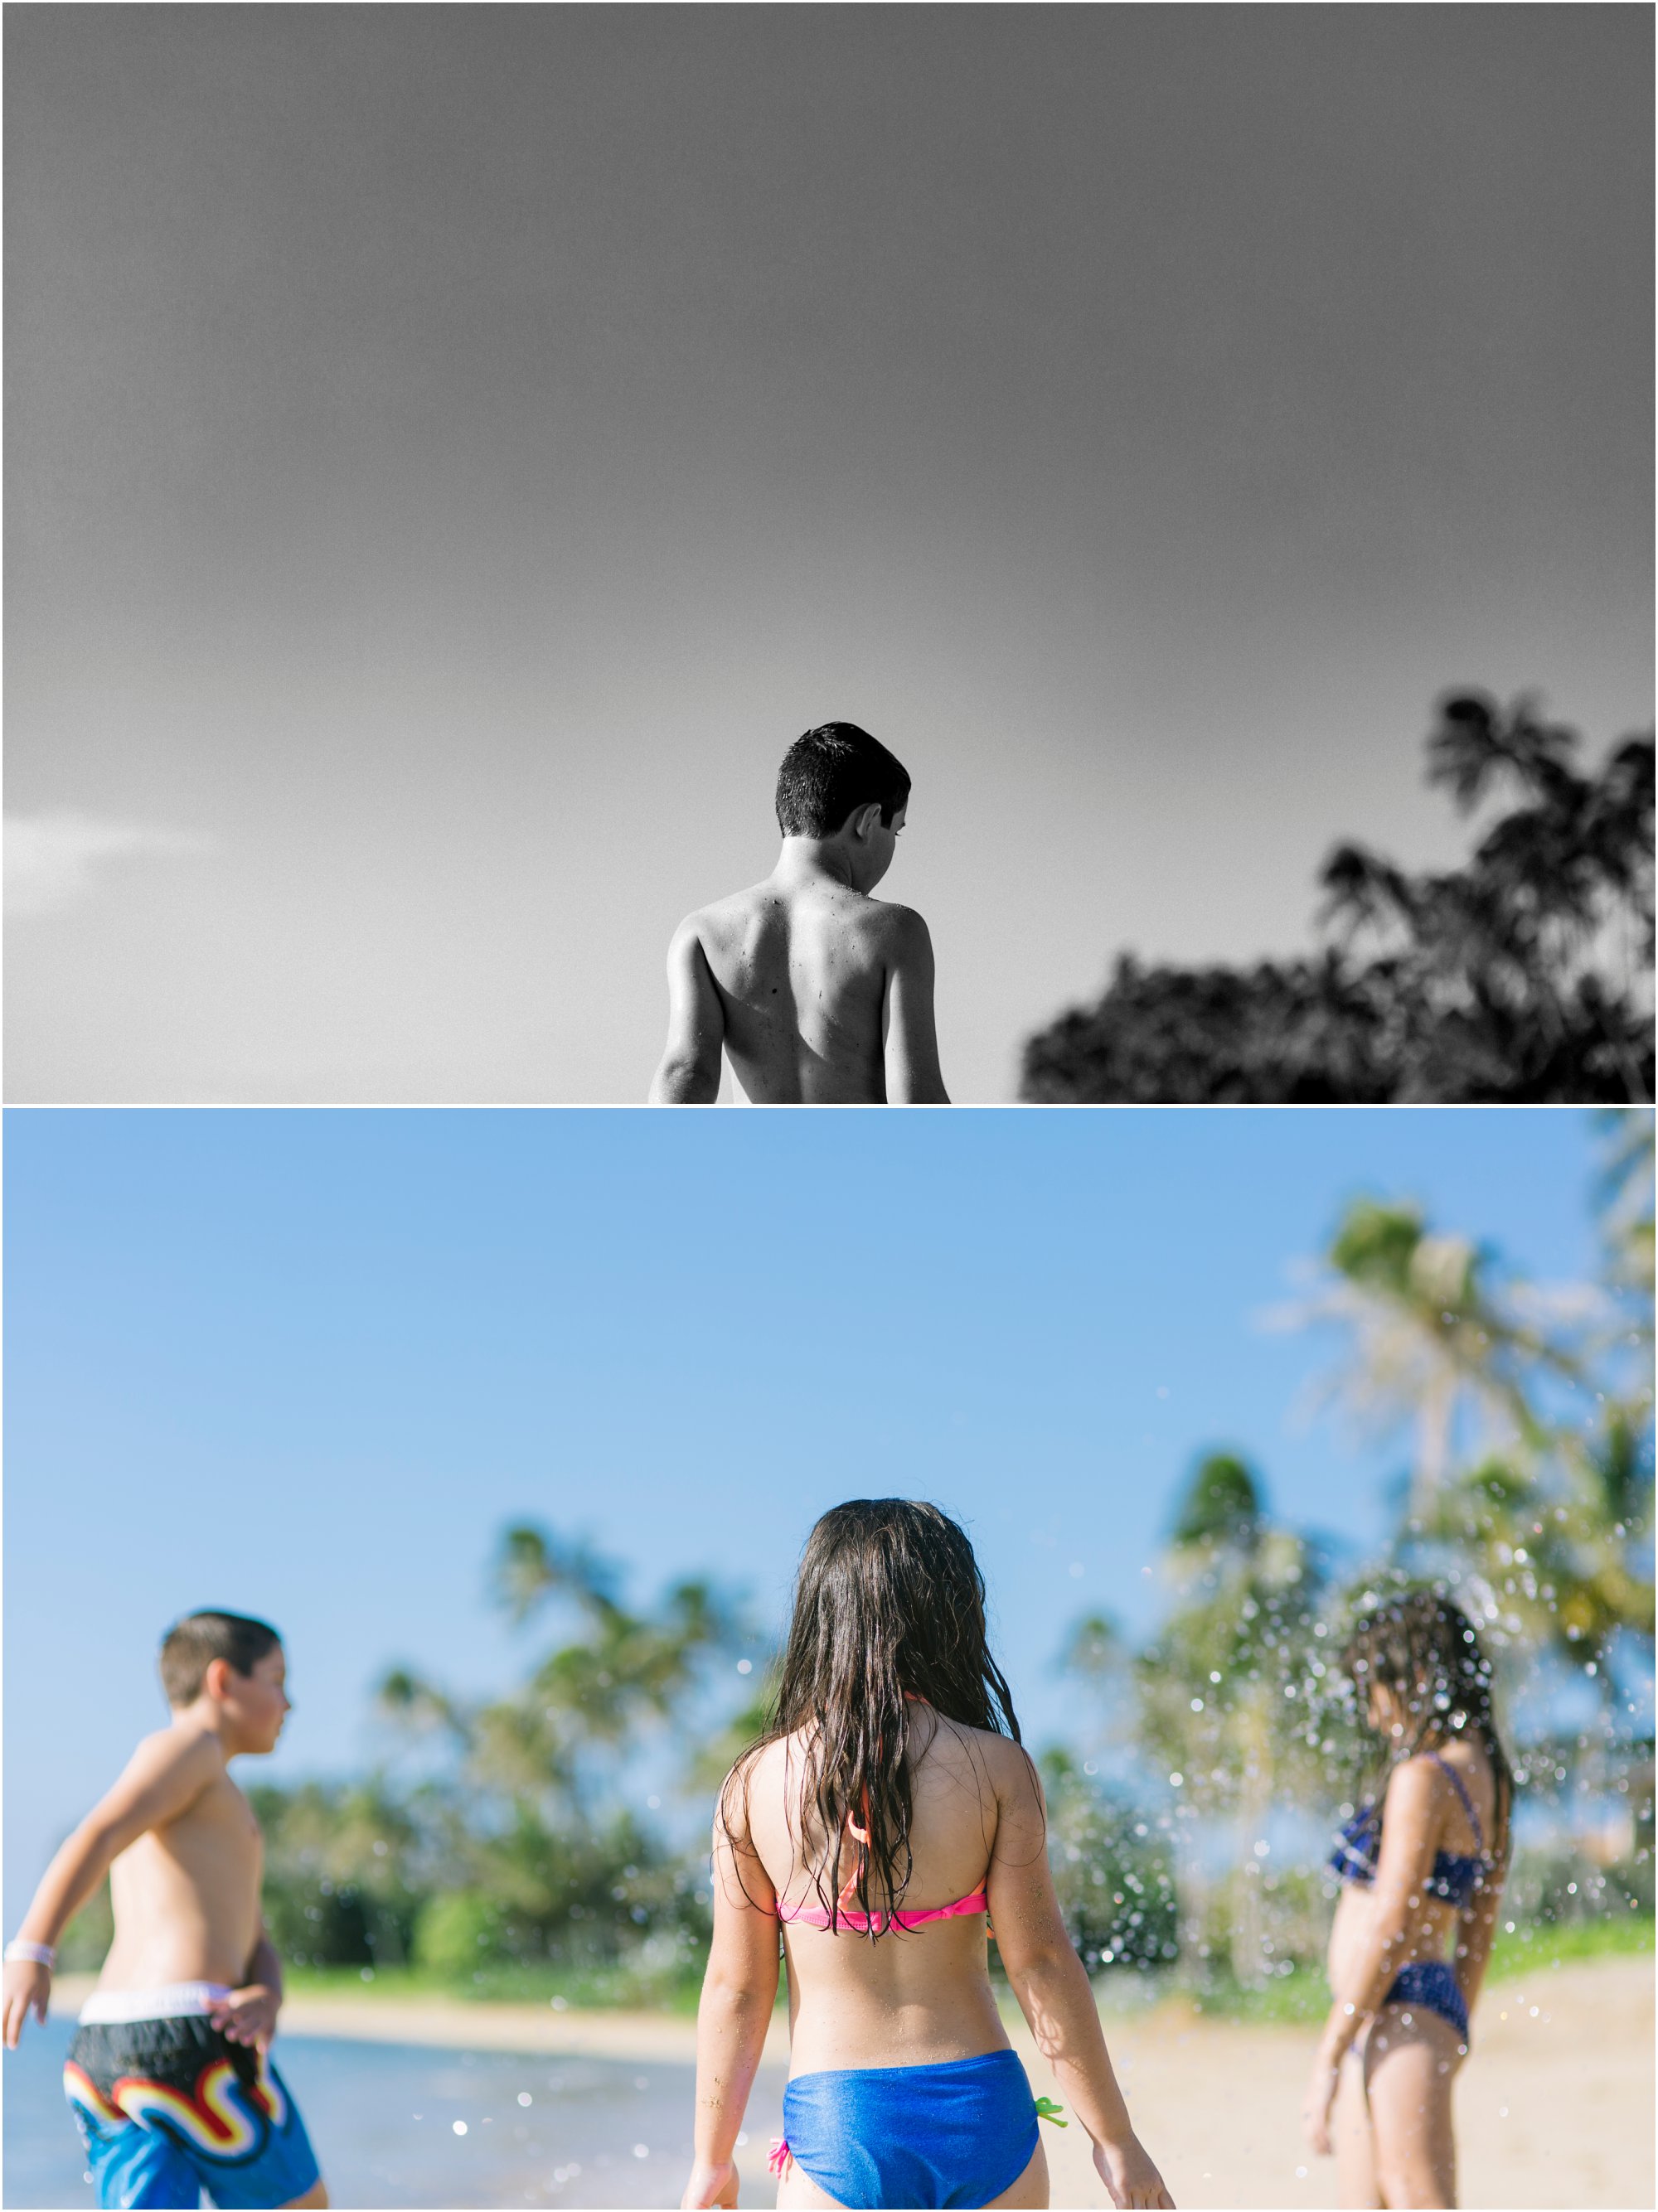 kids spalshing each other at the beach in oahu lifestyle photography